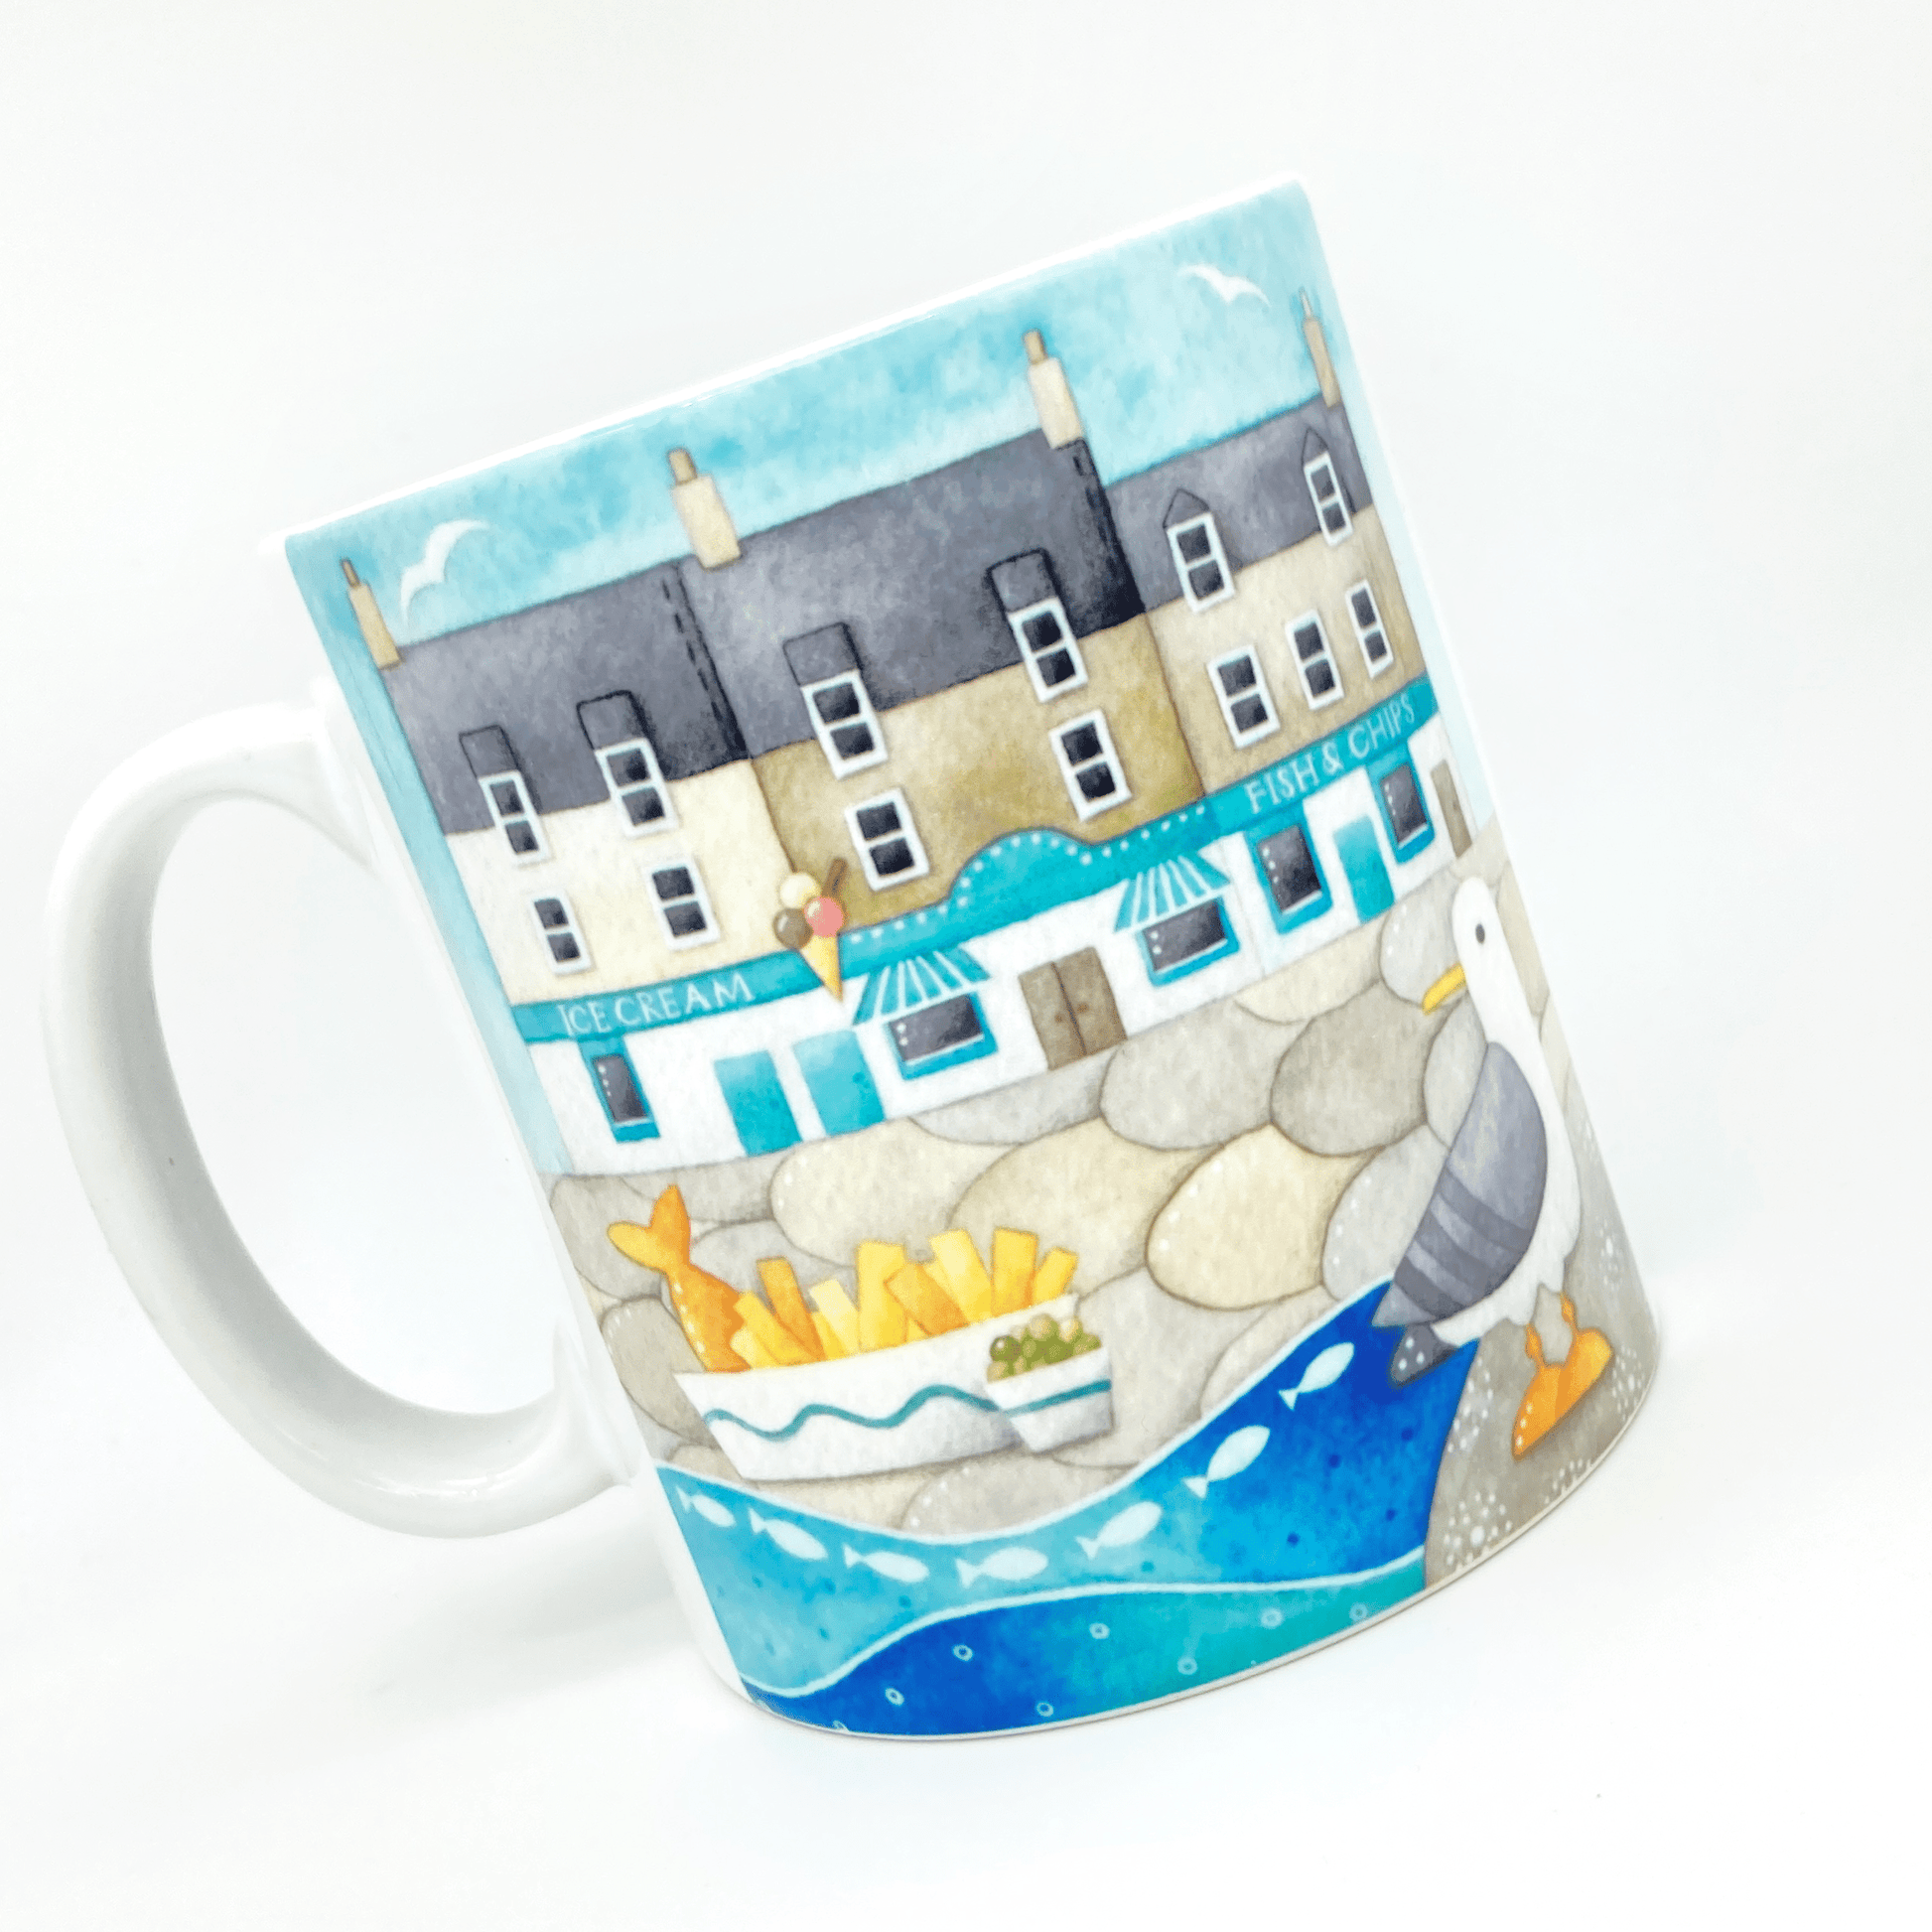 Seagull Mug - Fish and Chips at Anstruther - Seaside Watercolours, East Neuk of Fife - East Neuk Beach Crafts